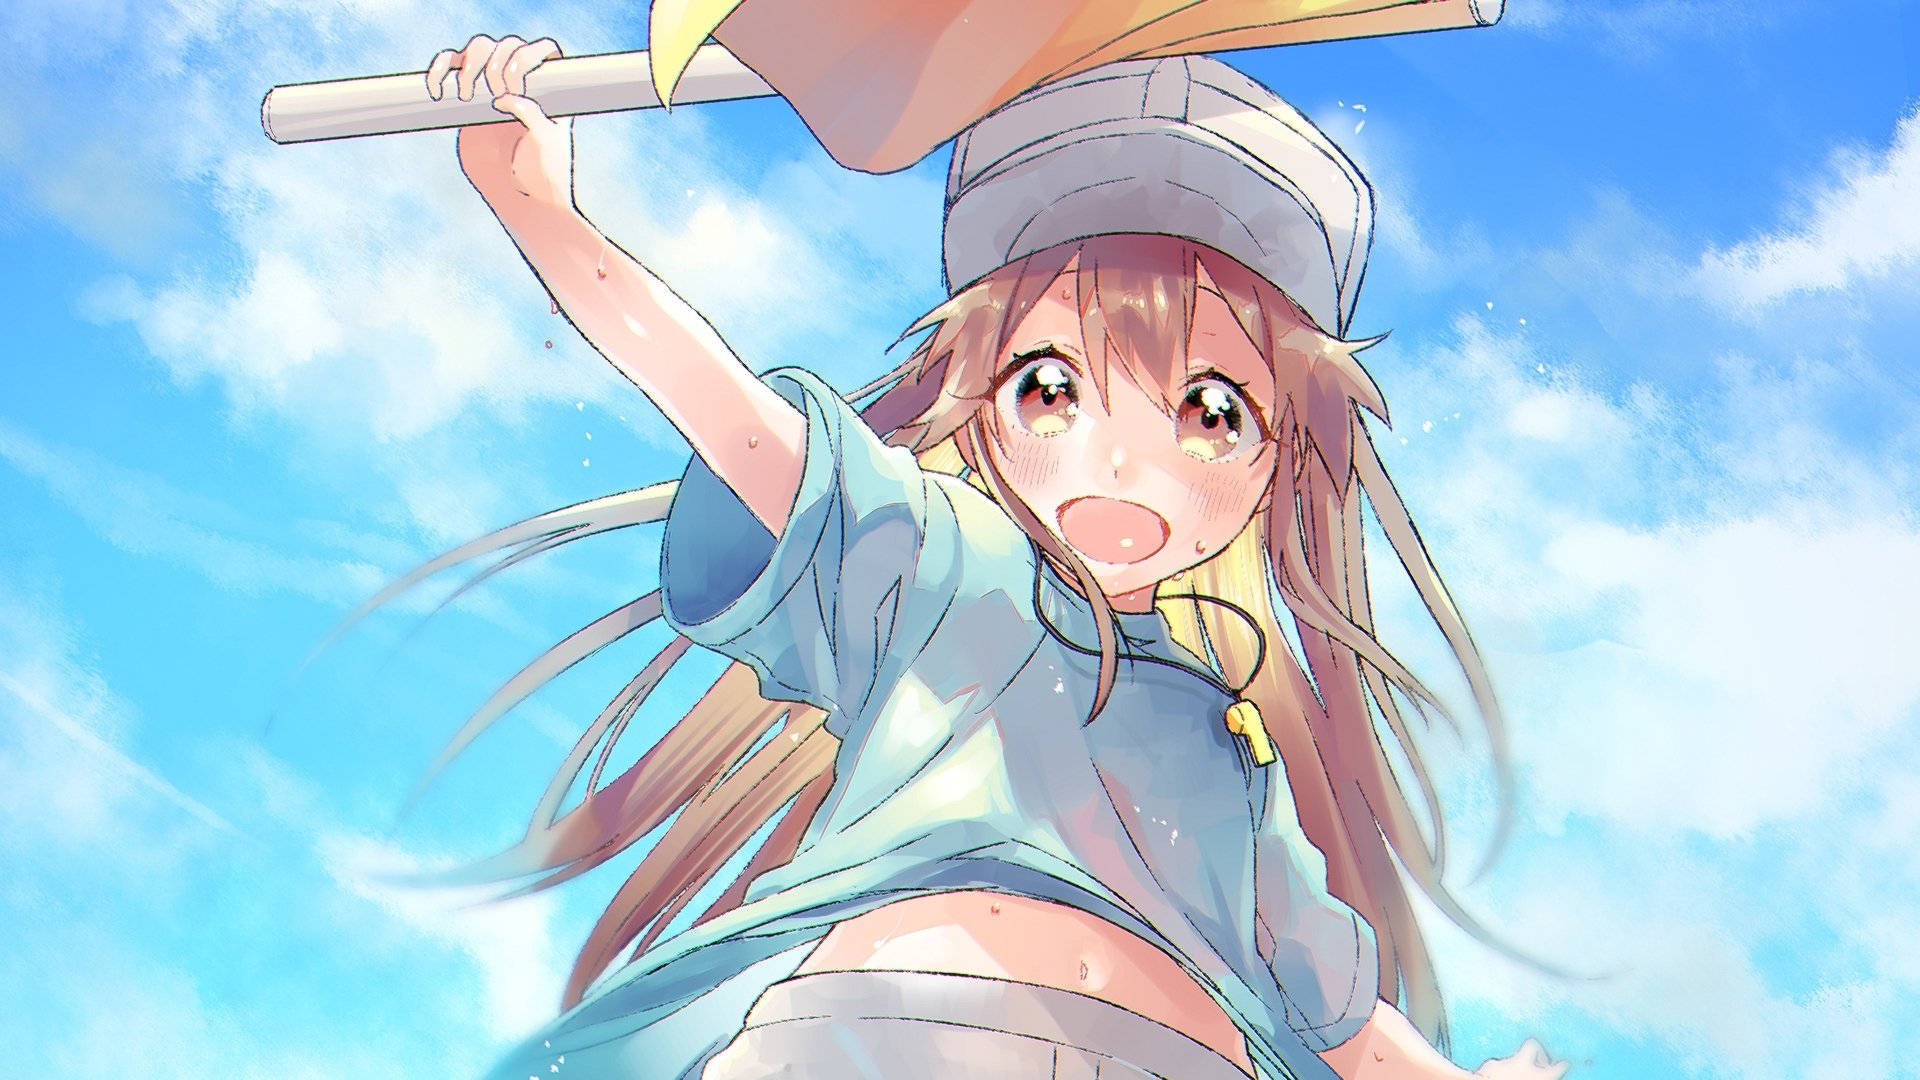 Cells at Work! Platelets Win 'Most Charming Character of 2018' Poll -  Interest - Anime News Network, cell at work anime character -  marazulseguros.com.br